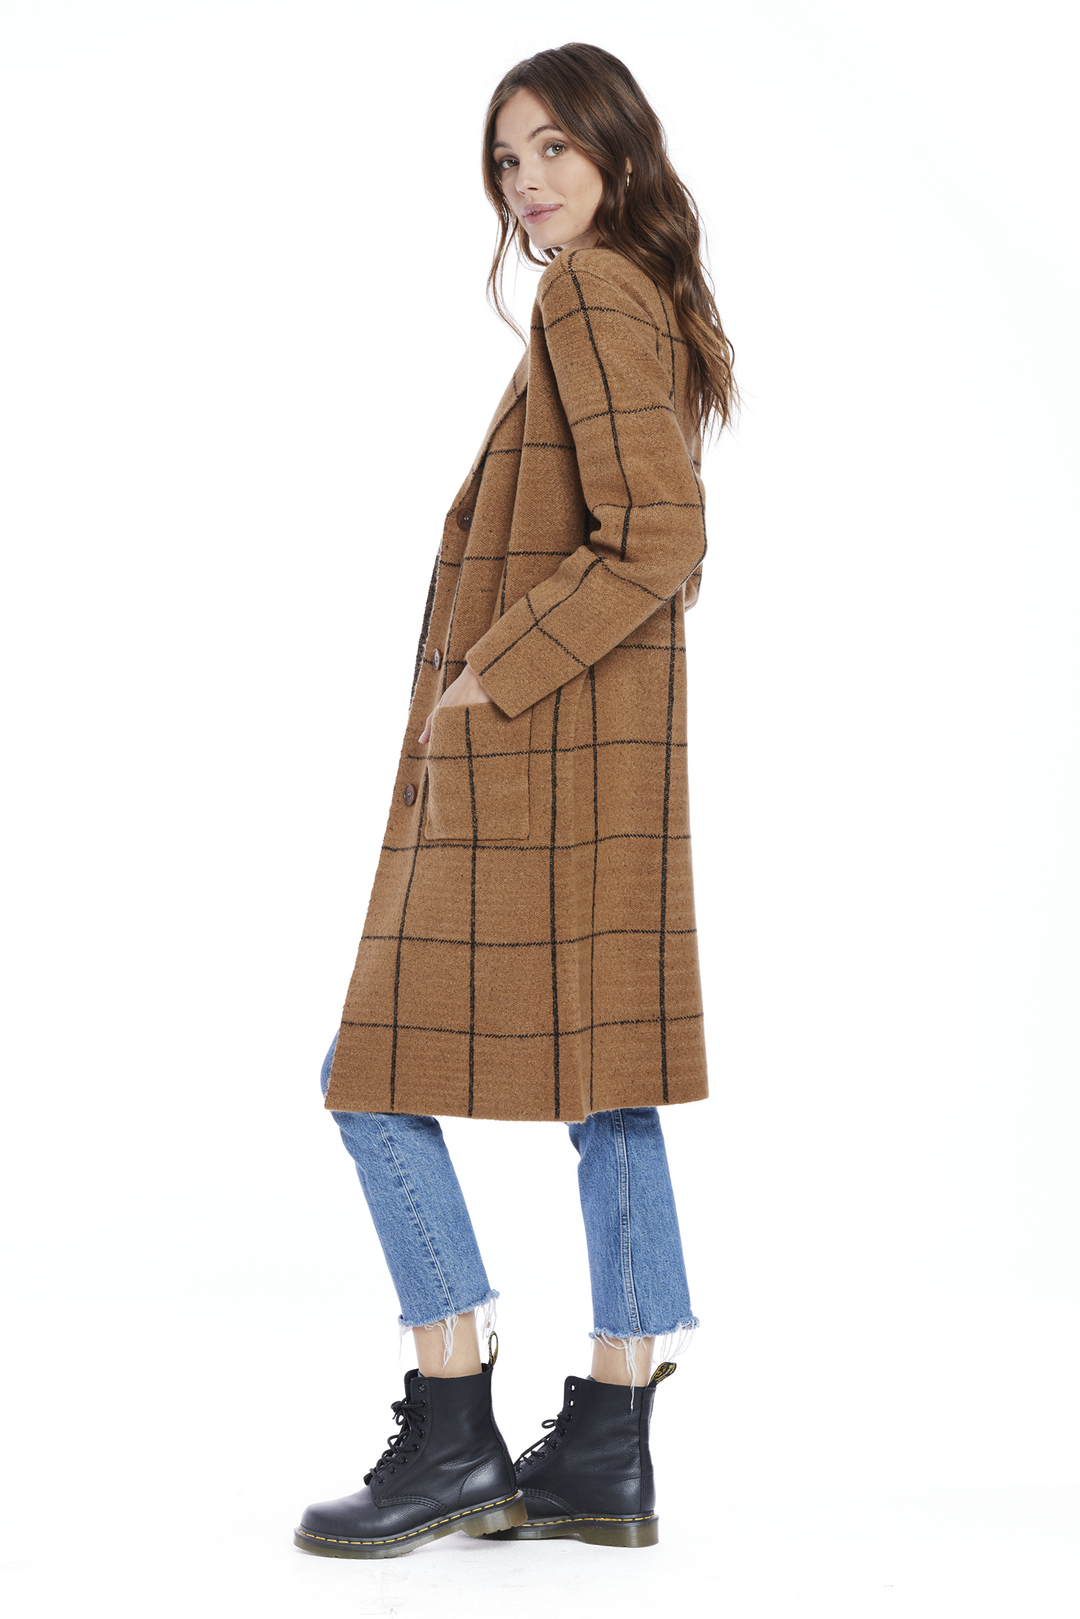 Plaid Long Sweater Jacket | Sienna - Main Image Number 2 of 3